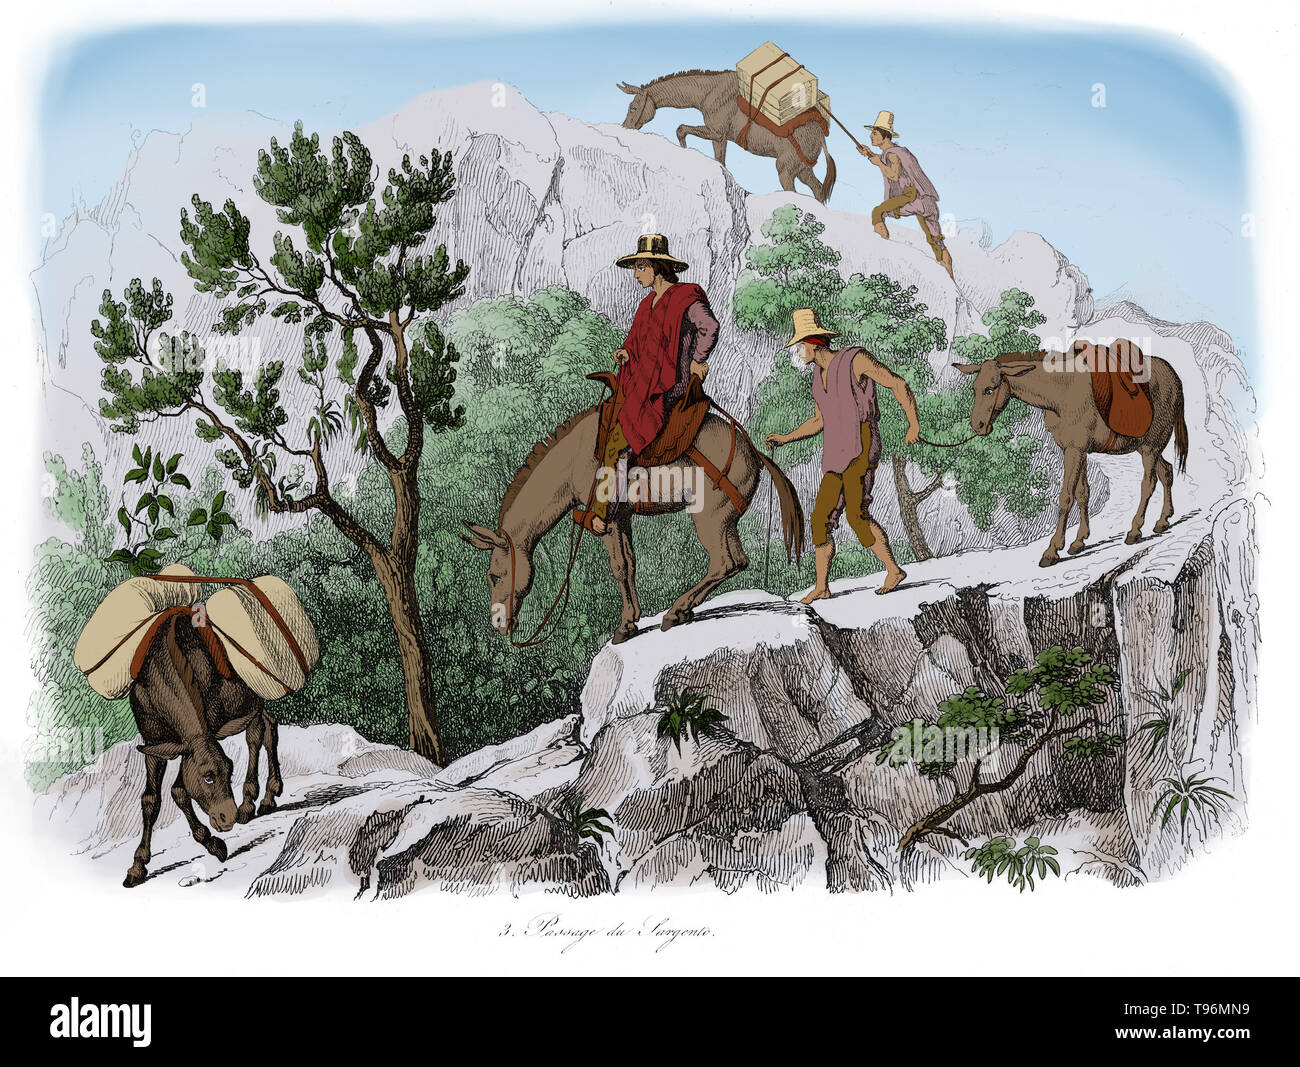 The explorer and naturalist Alexander von Humboldt travelling on mules in the Andes. Humboldt (1769-1859) was a Prussian geographer, naturalist and explorer. His quantitative work on botanical geography laid the foundation for the field of biogeography. Between 1799 and 1804, Humboldt travelled extensively in Latin America, exploring and describing it for the first time in a manner generally considered to be a modern scientific point of view. Stock Photo